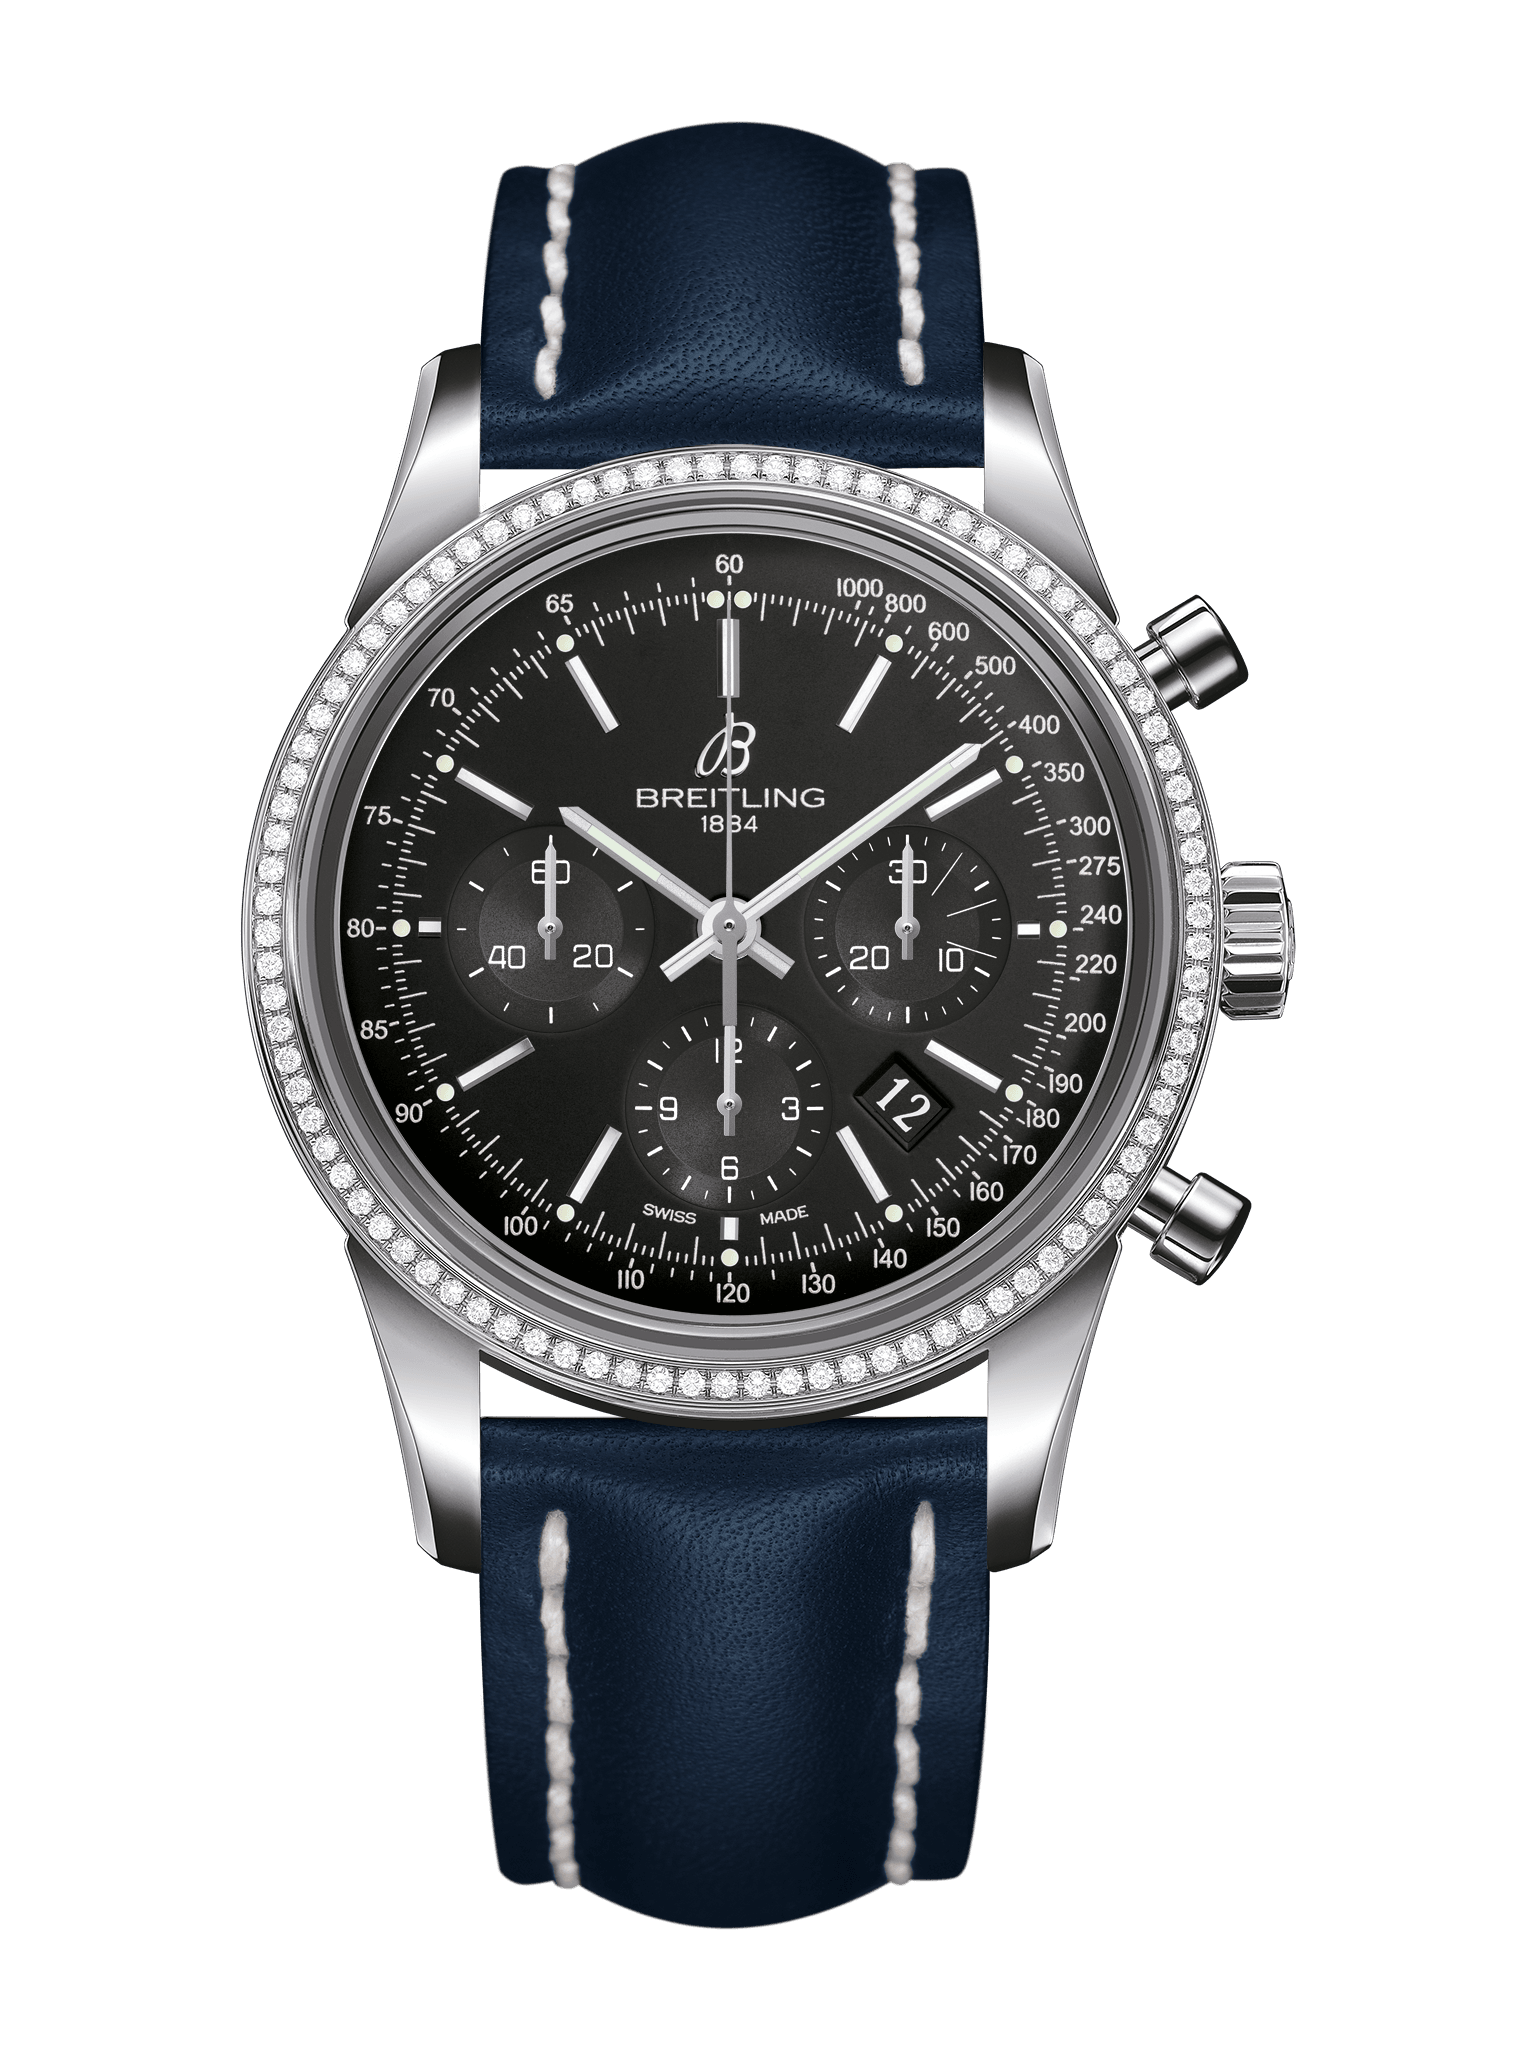 How Can You Tell The Fake Breitling Watch From The Real One